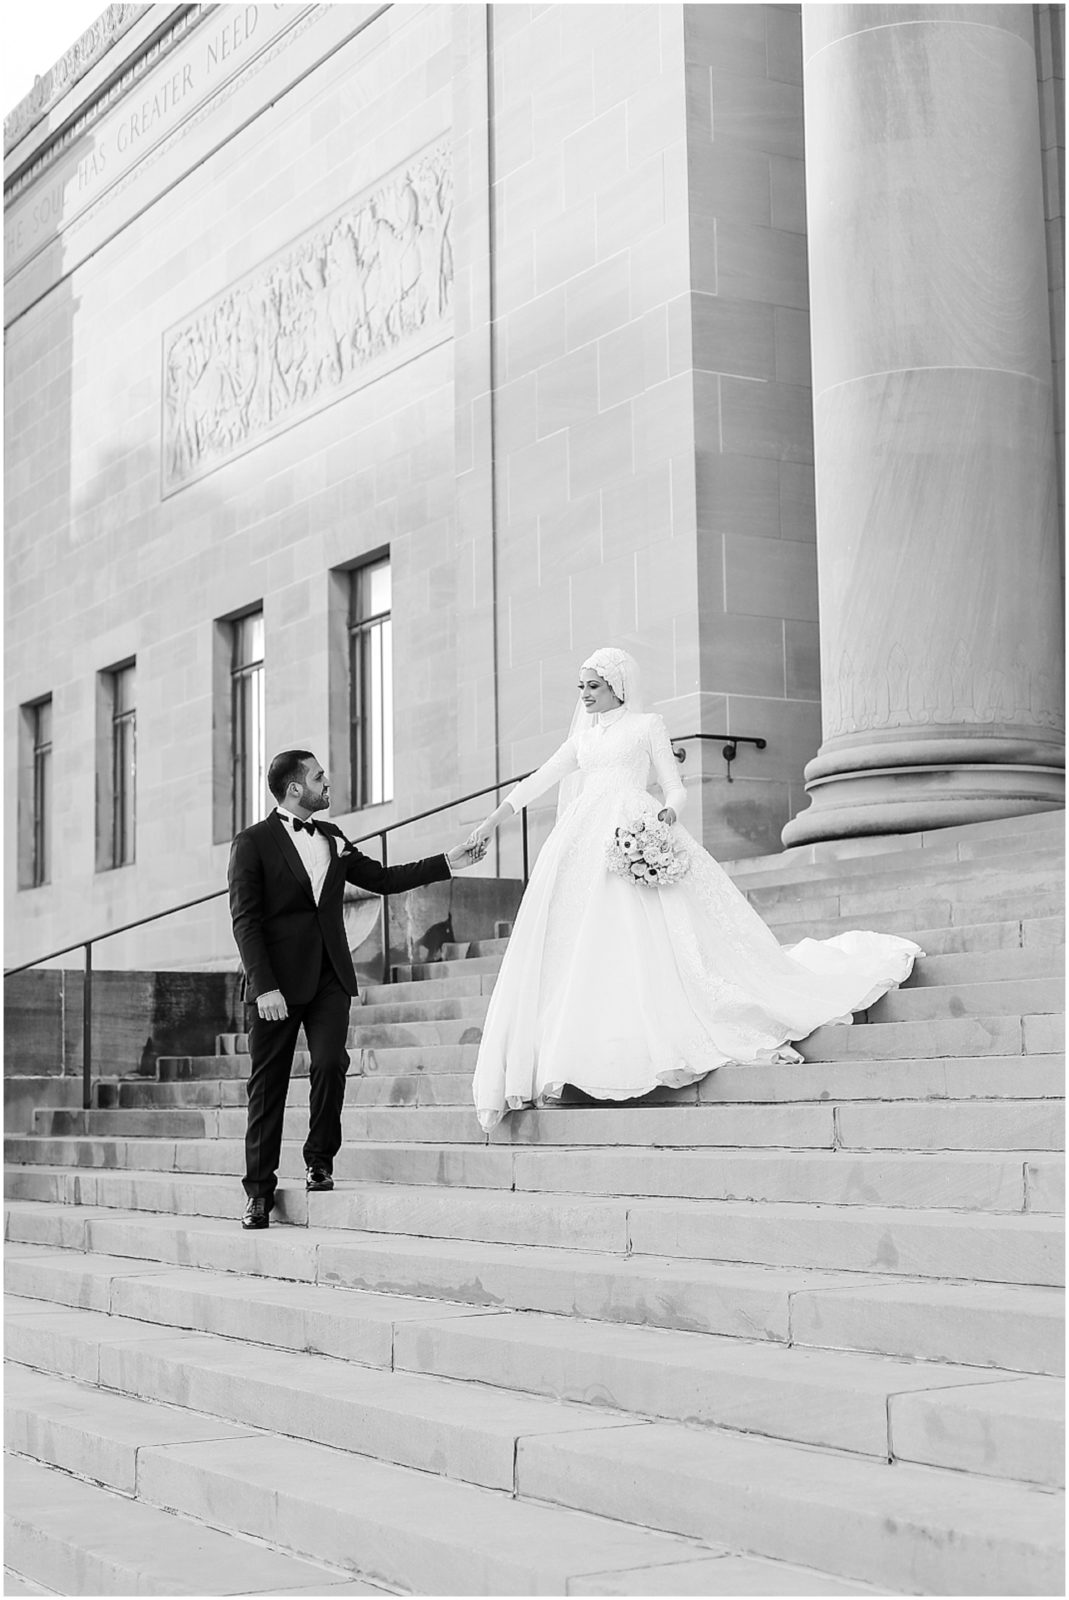 elegant and classy wedding photo at the nelson atkins musem 